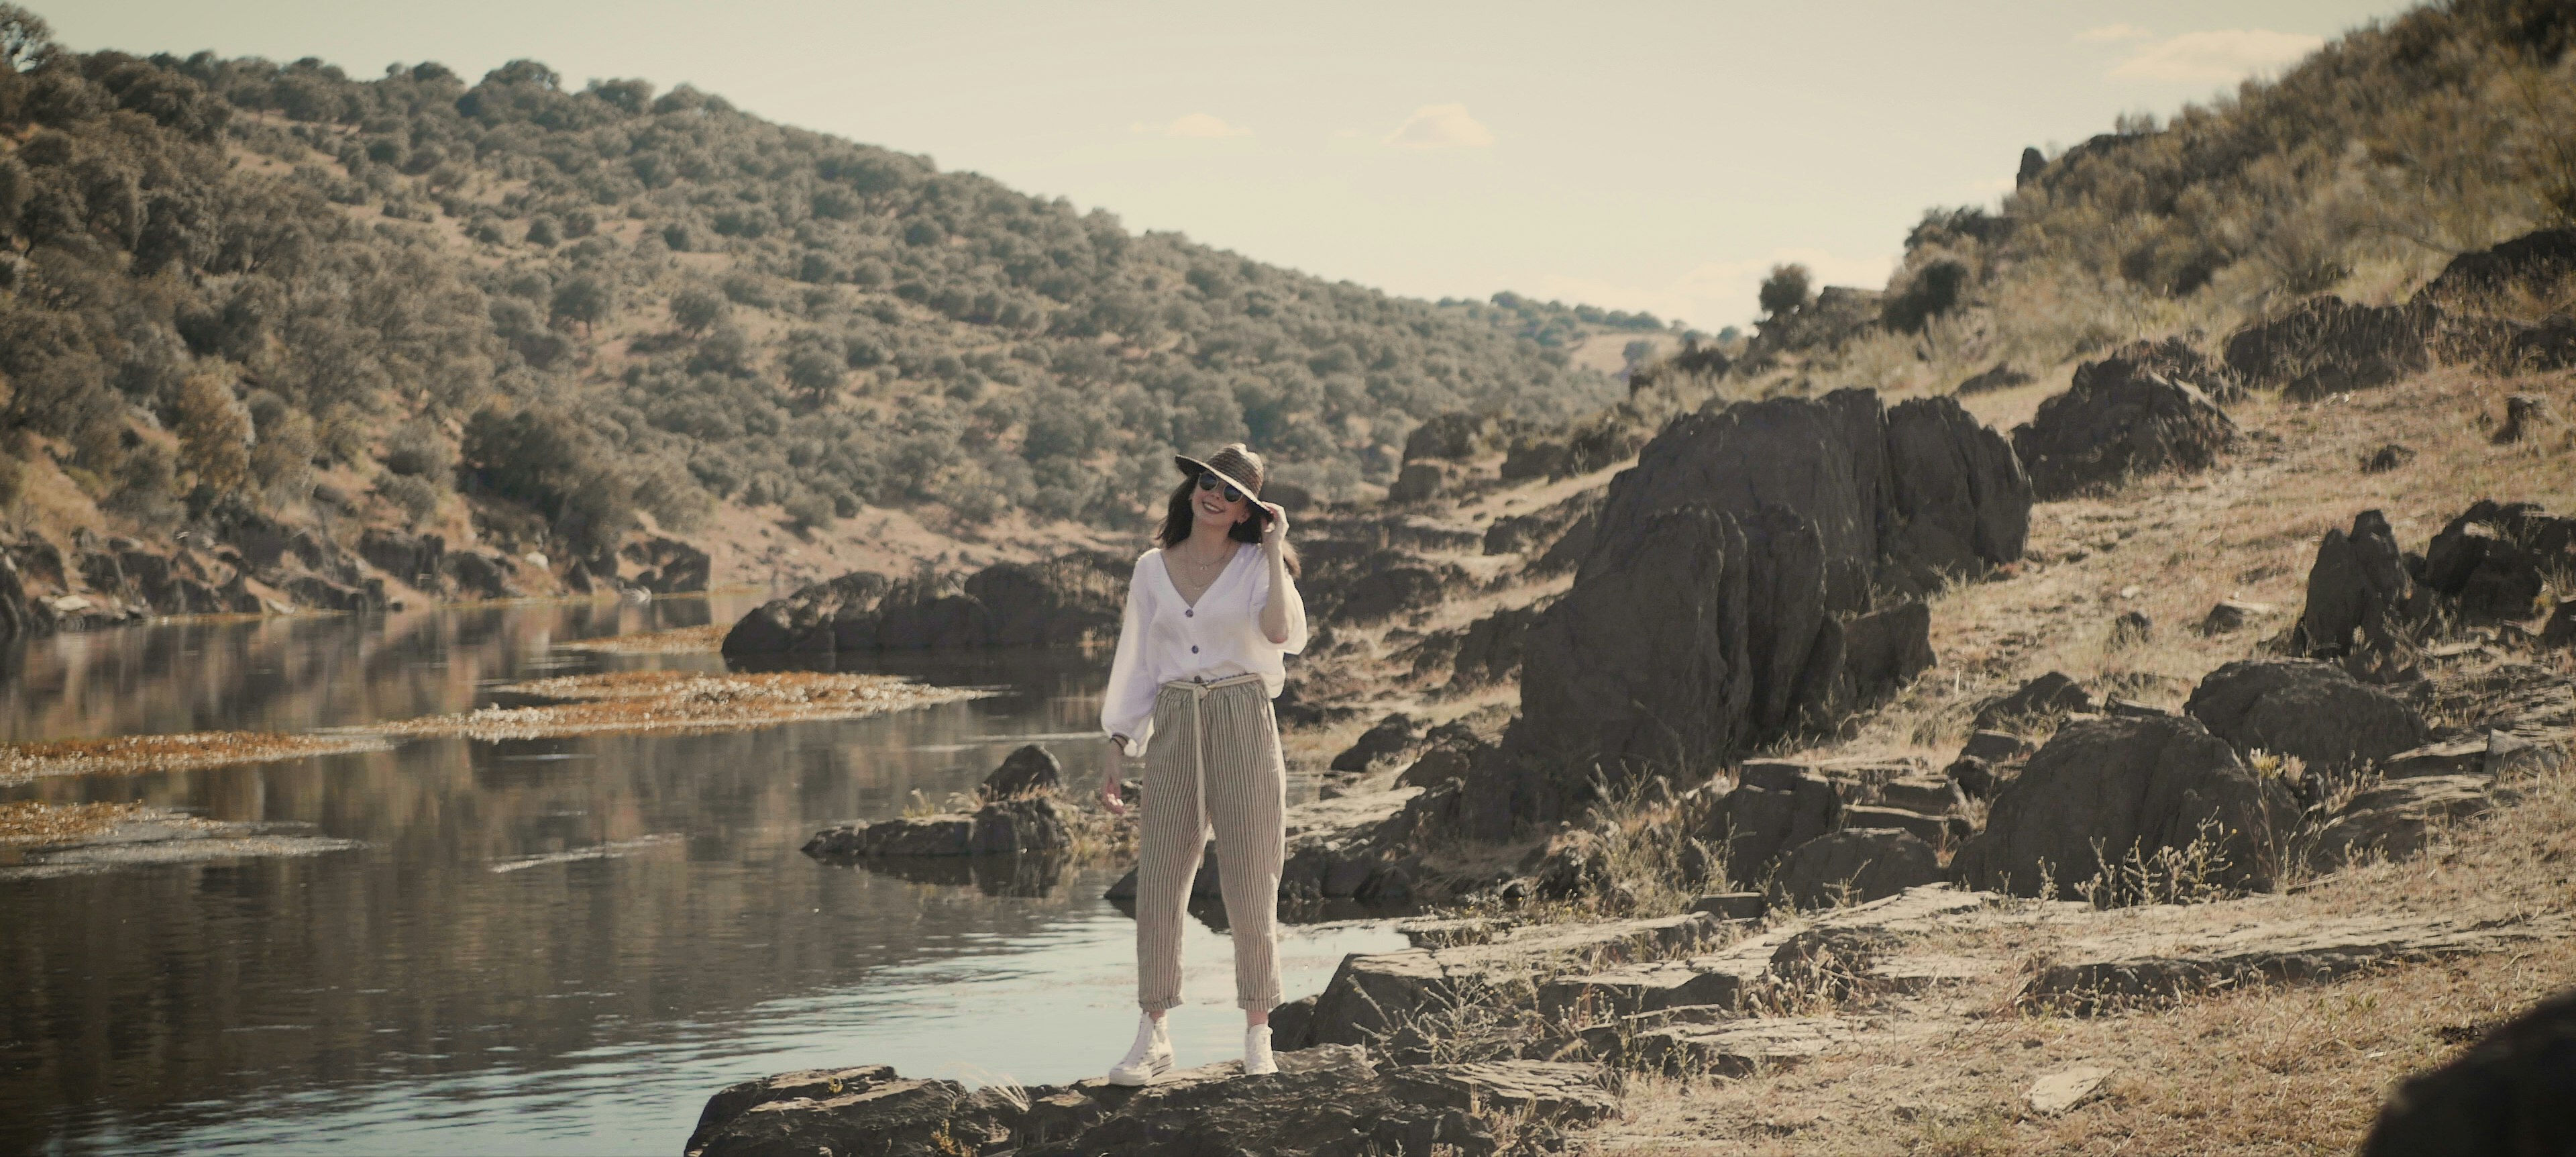 woman in white shirt and white pants standing on brown rock near river during daytime